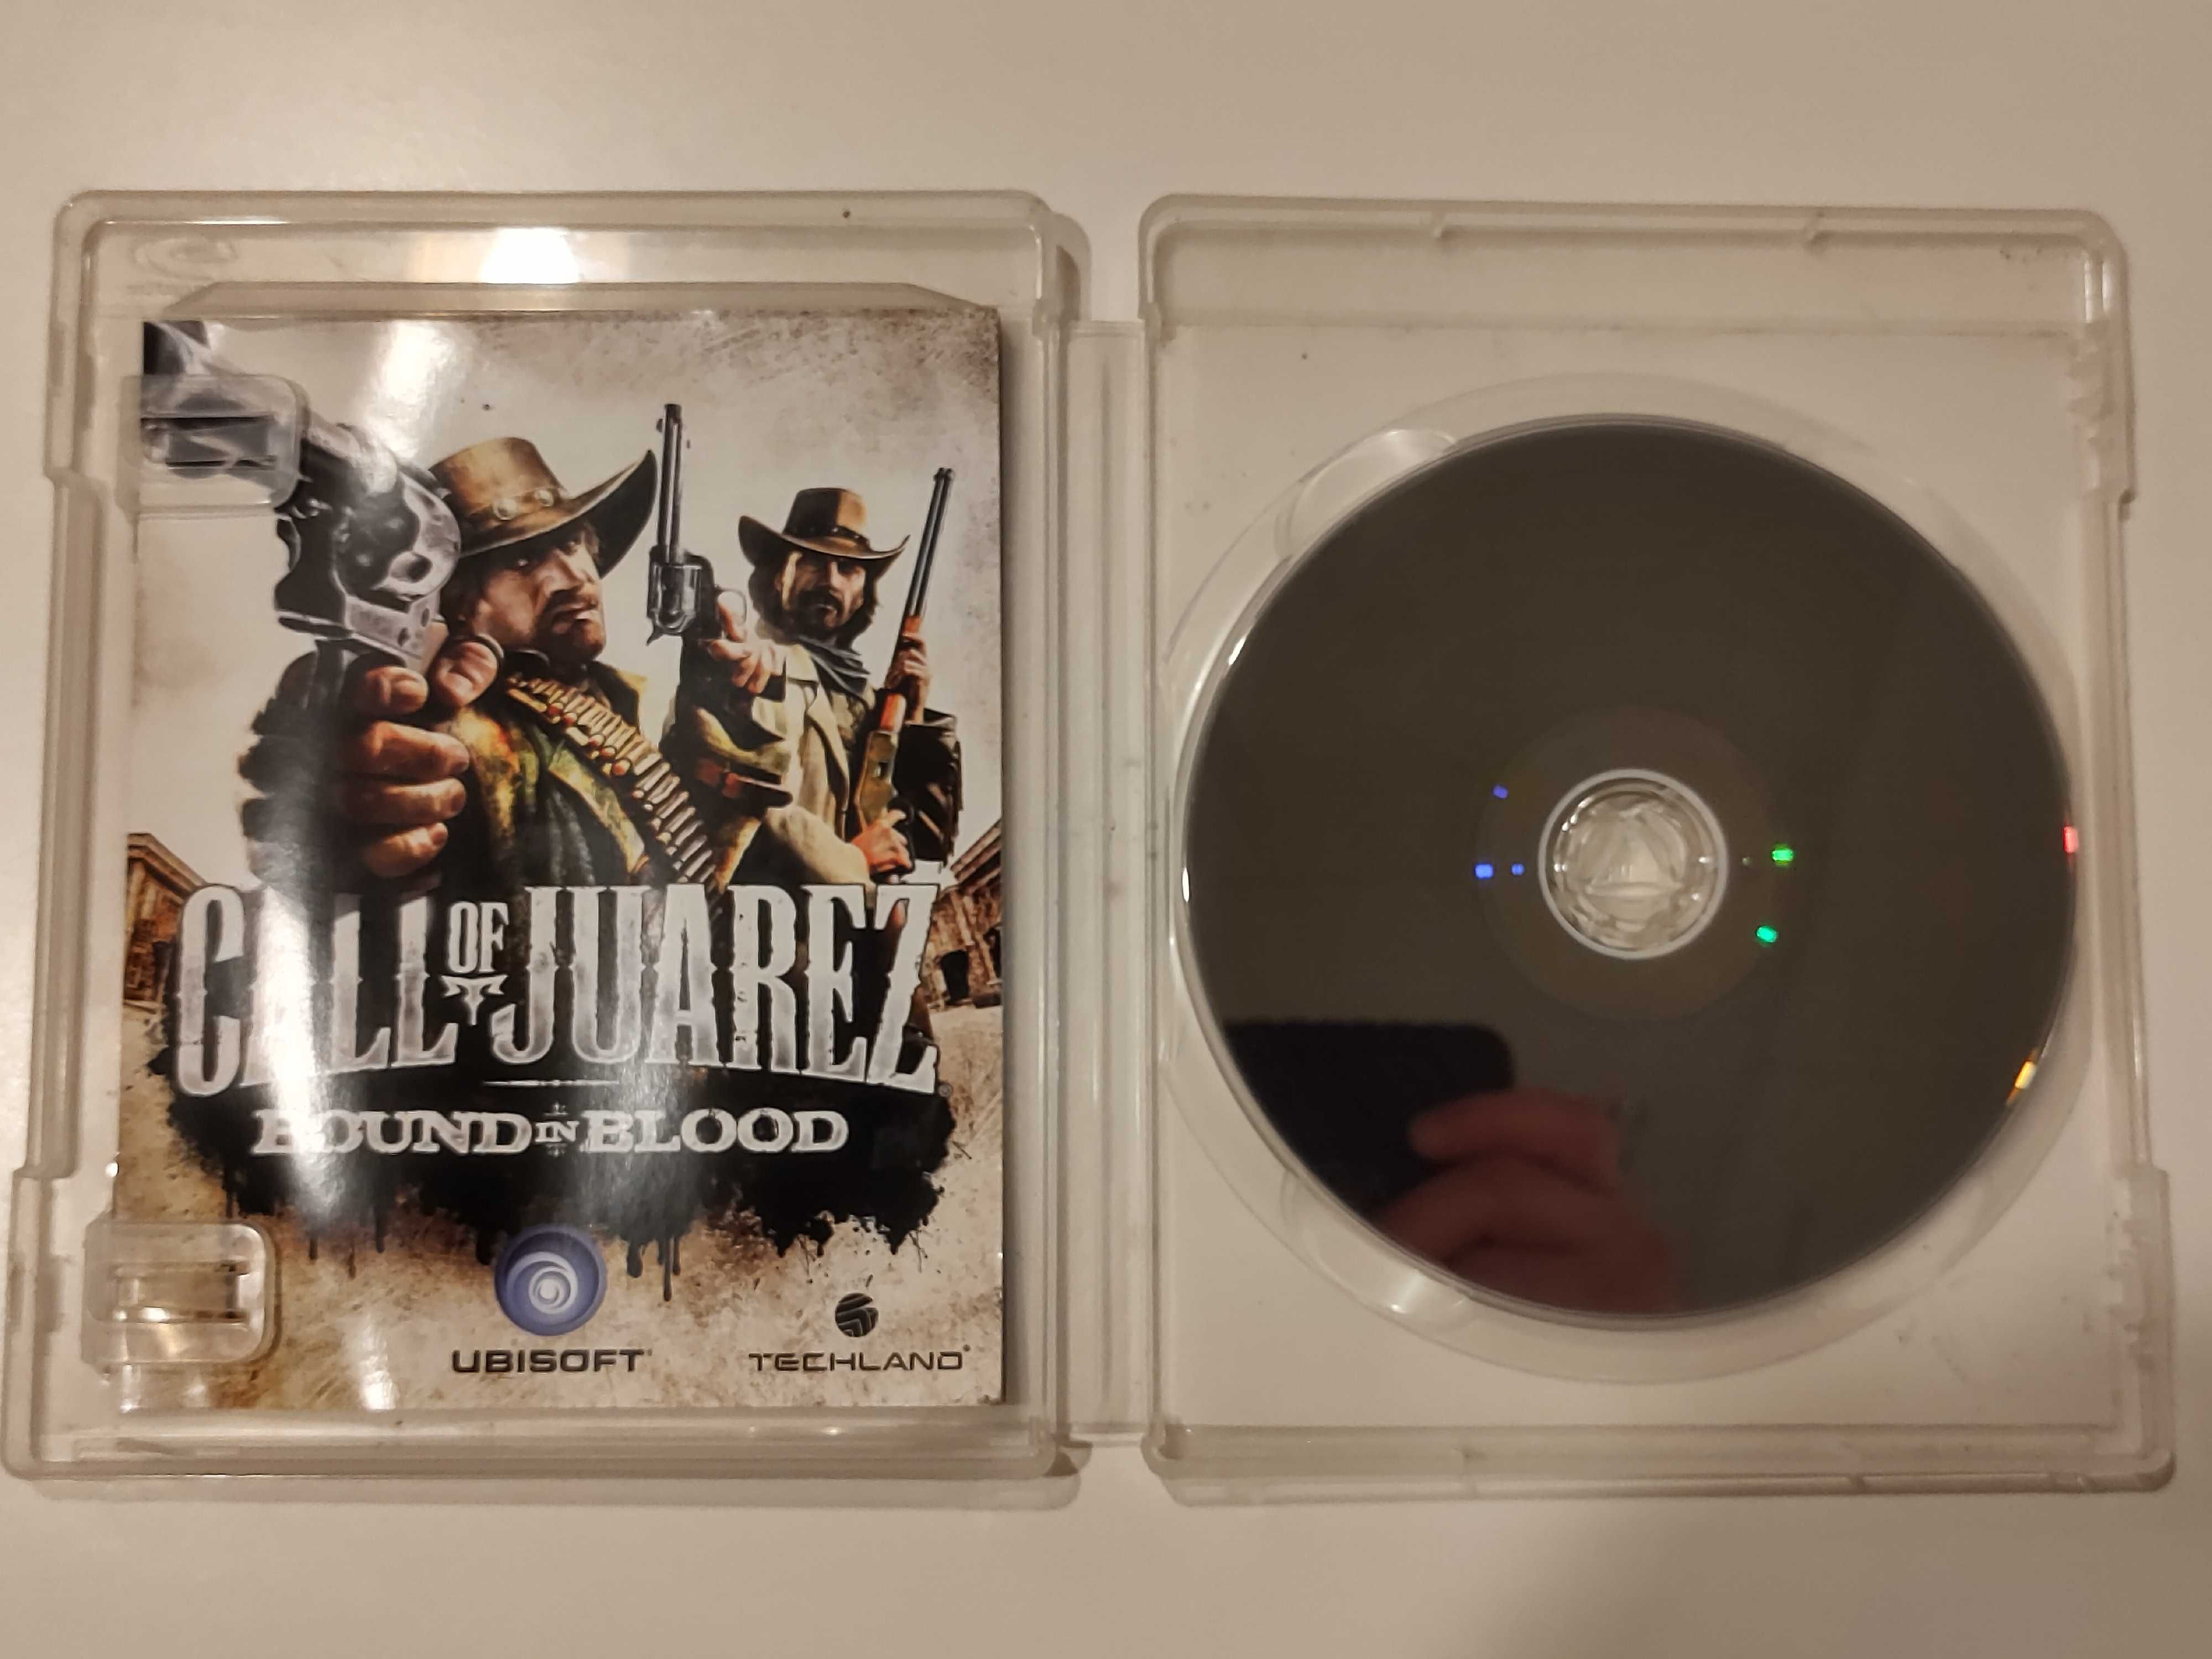 PS3 Call Of Juarez Bound In Blood PlayStation 3